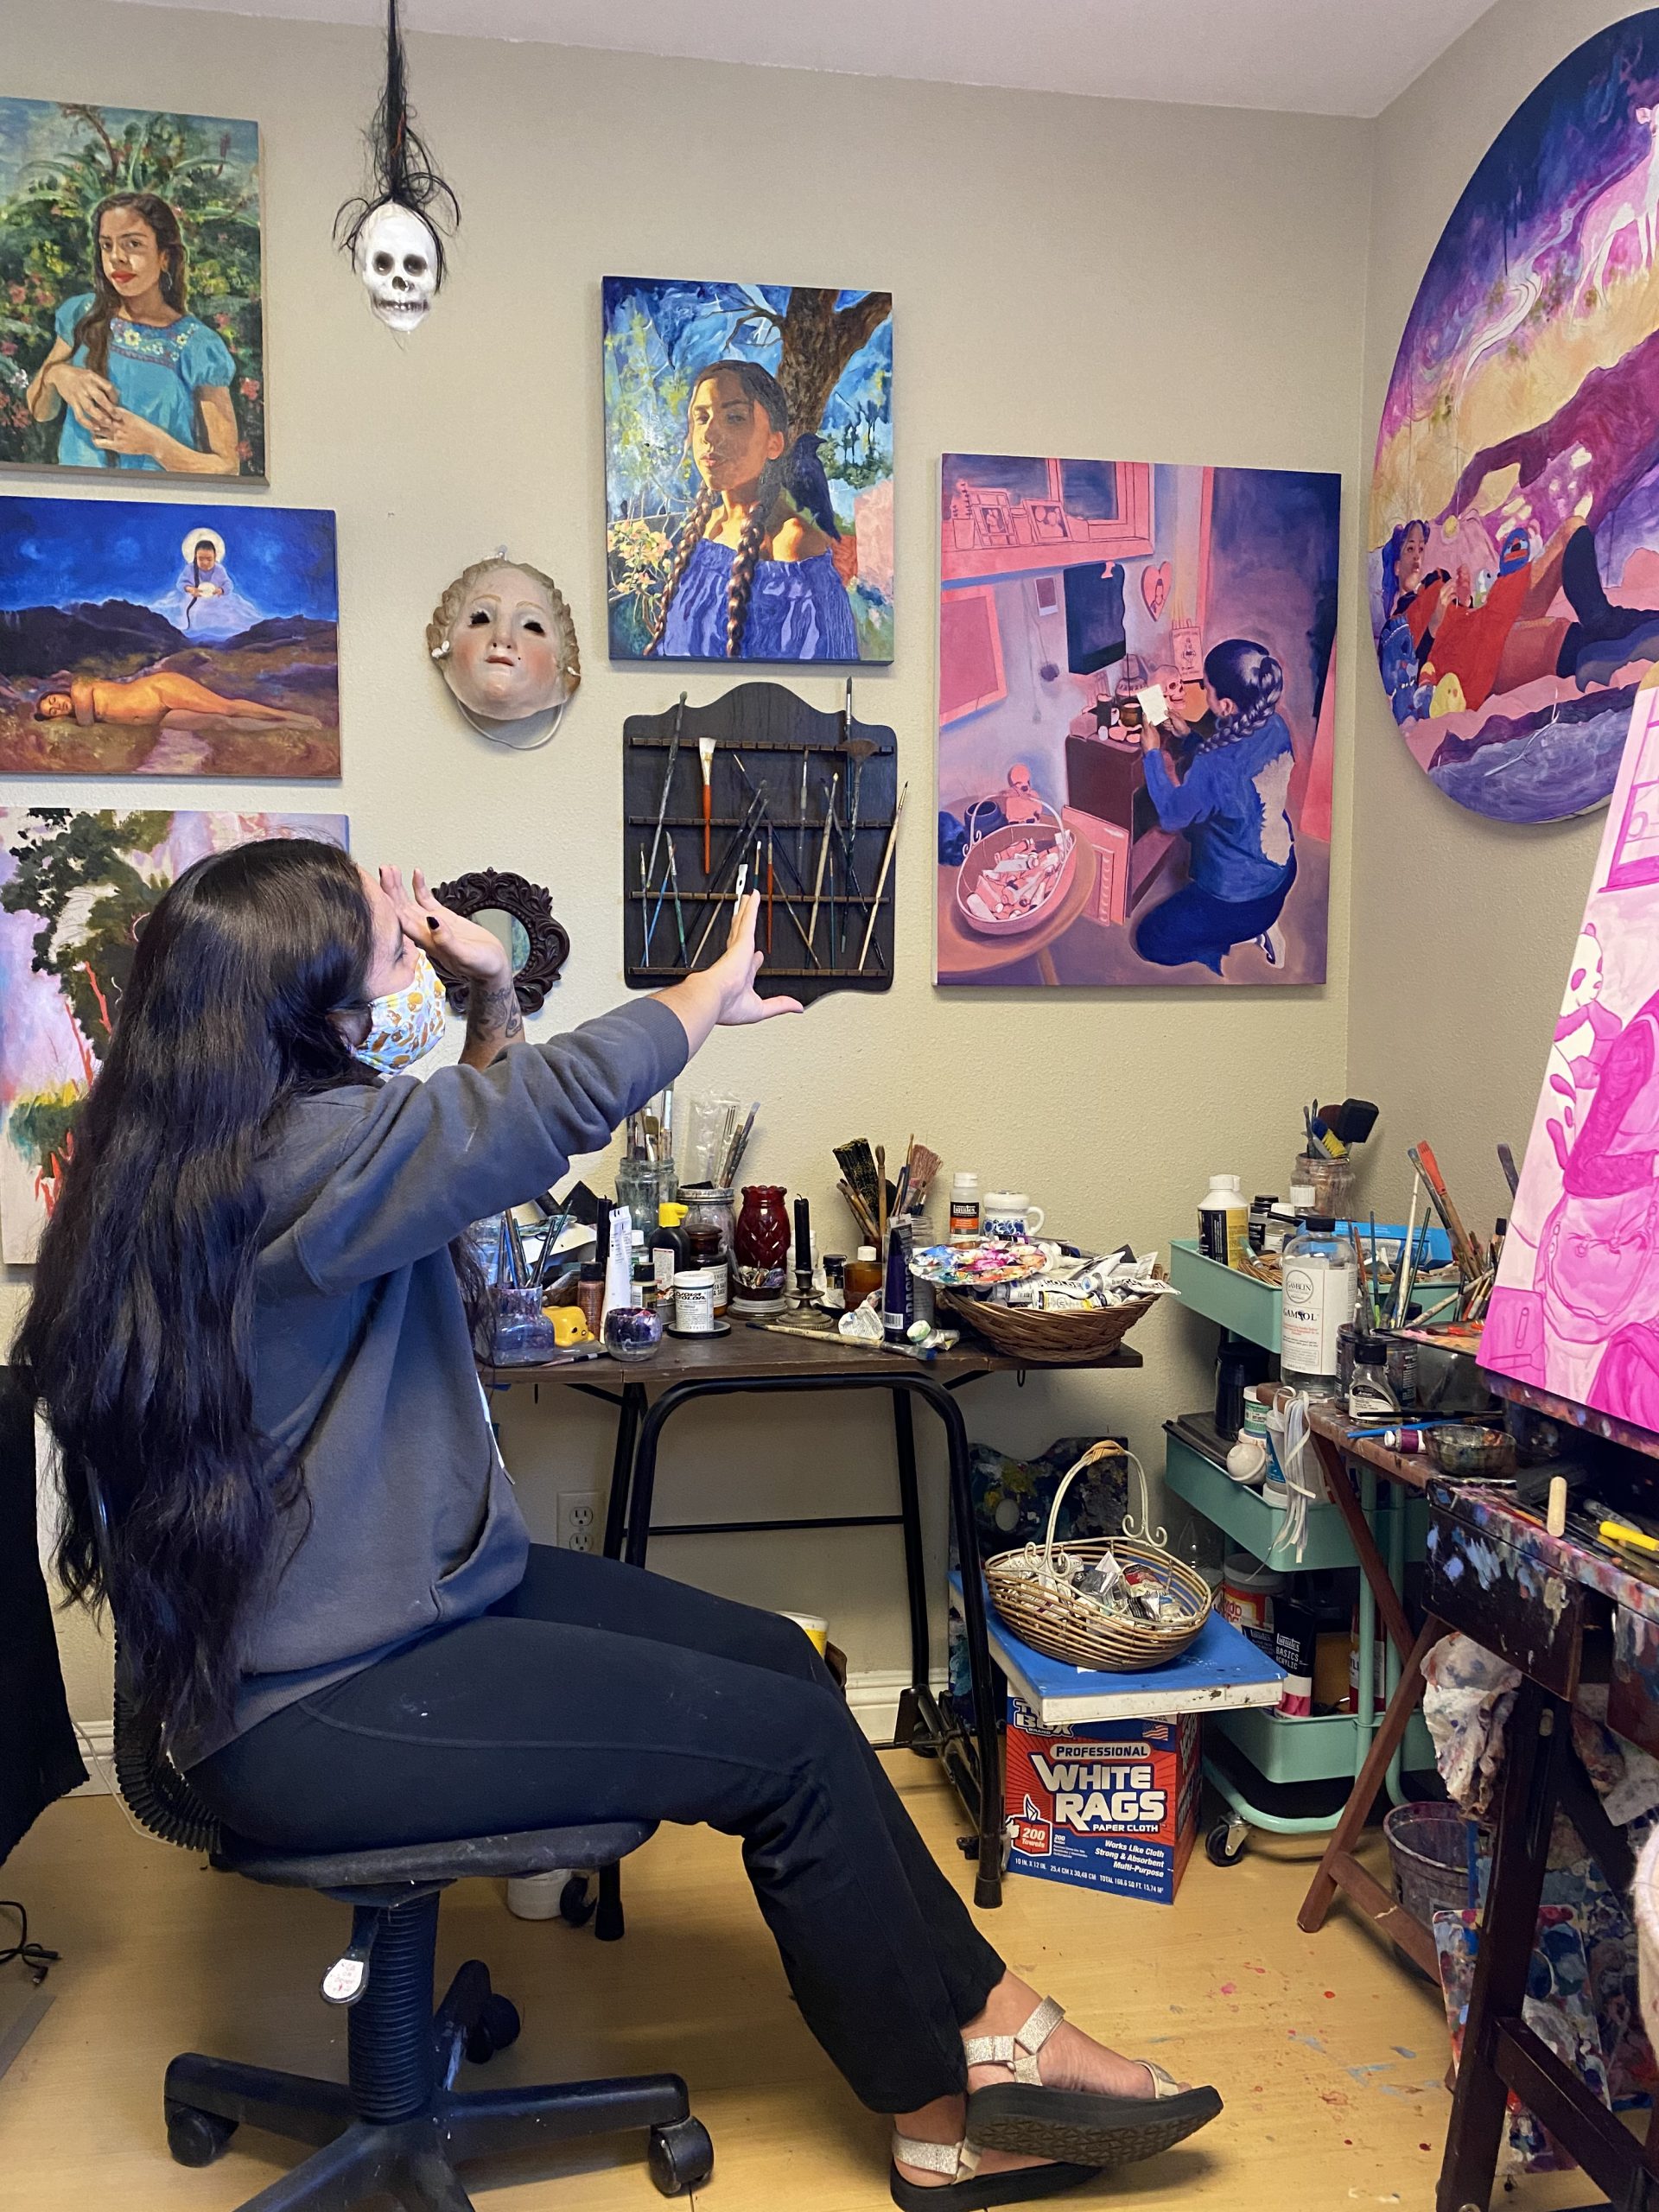 Her Culture on Canvas: Simi Artist creates paintings for Netflix’s Gentefied